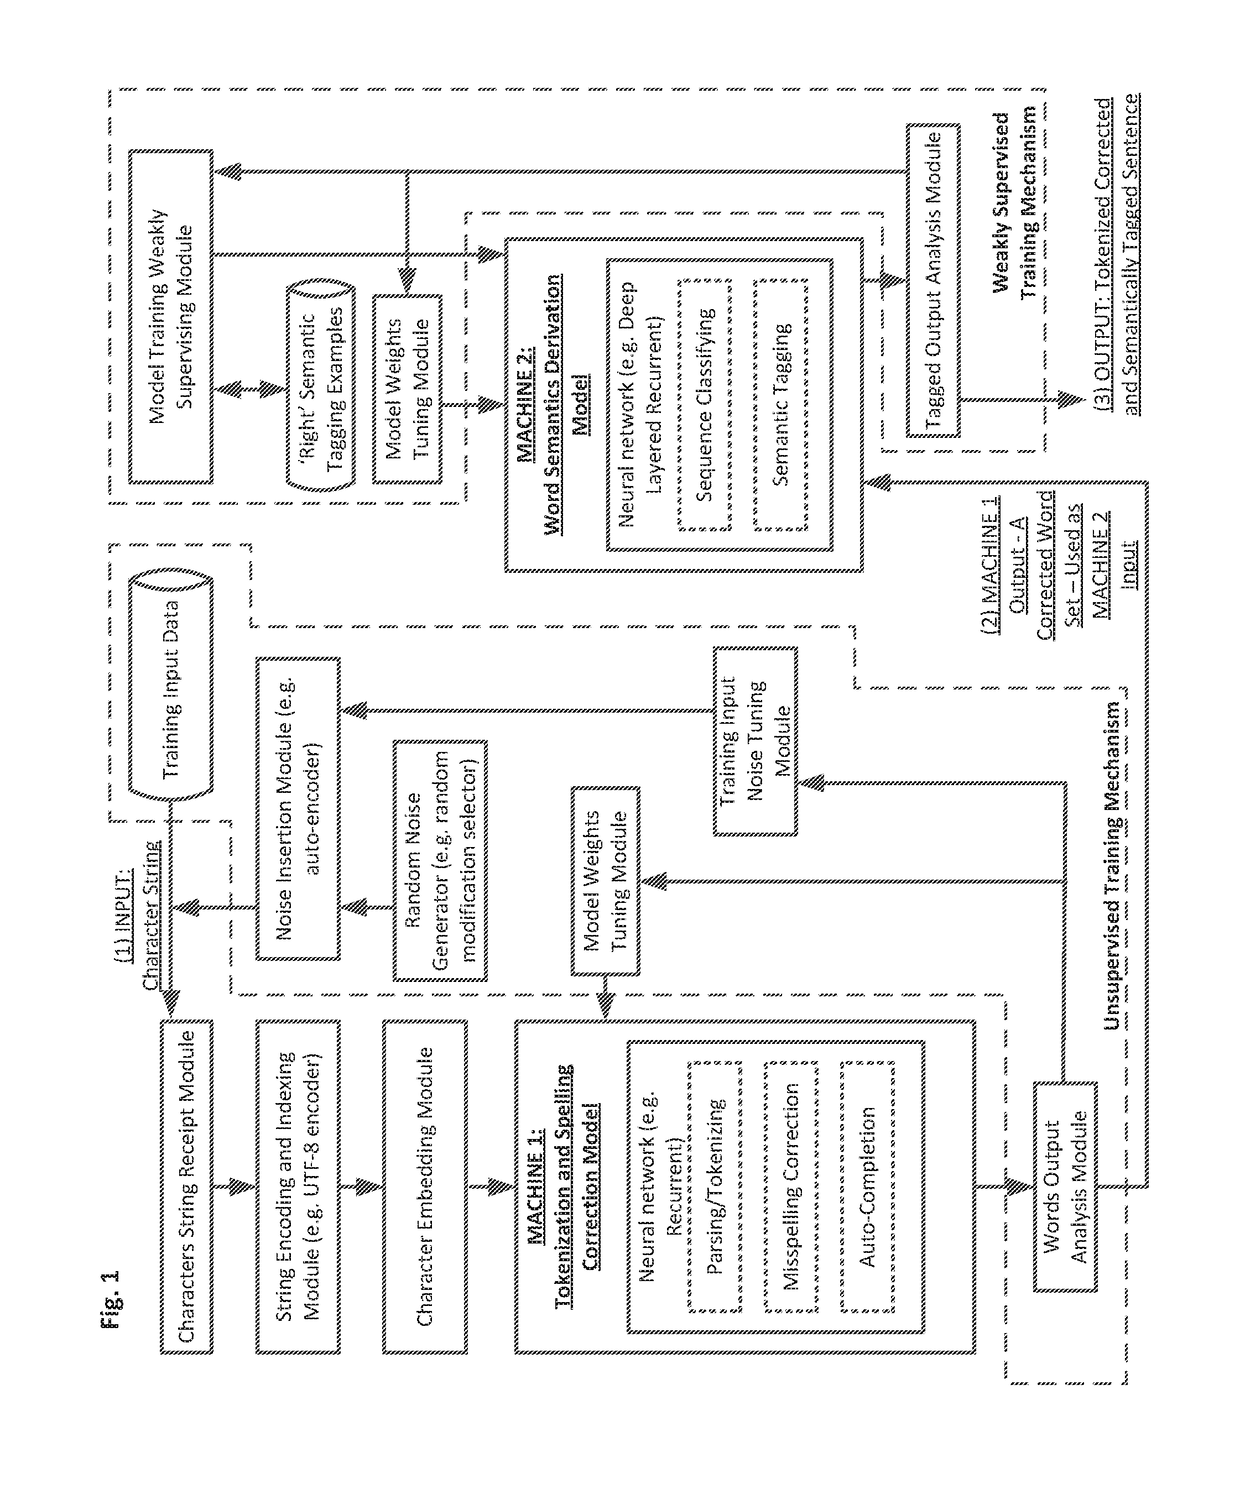 Systems methods circuits and associated computer executable code for deep learning based natural language understanding